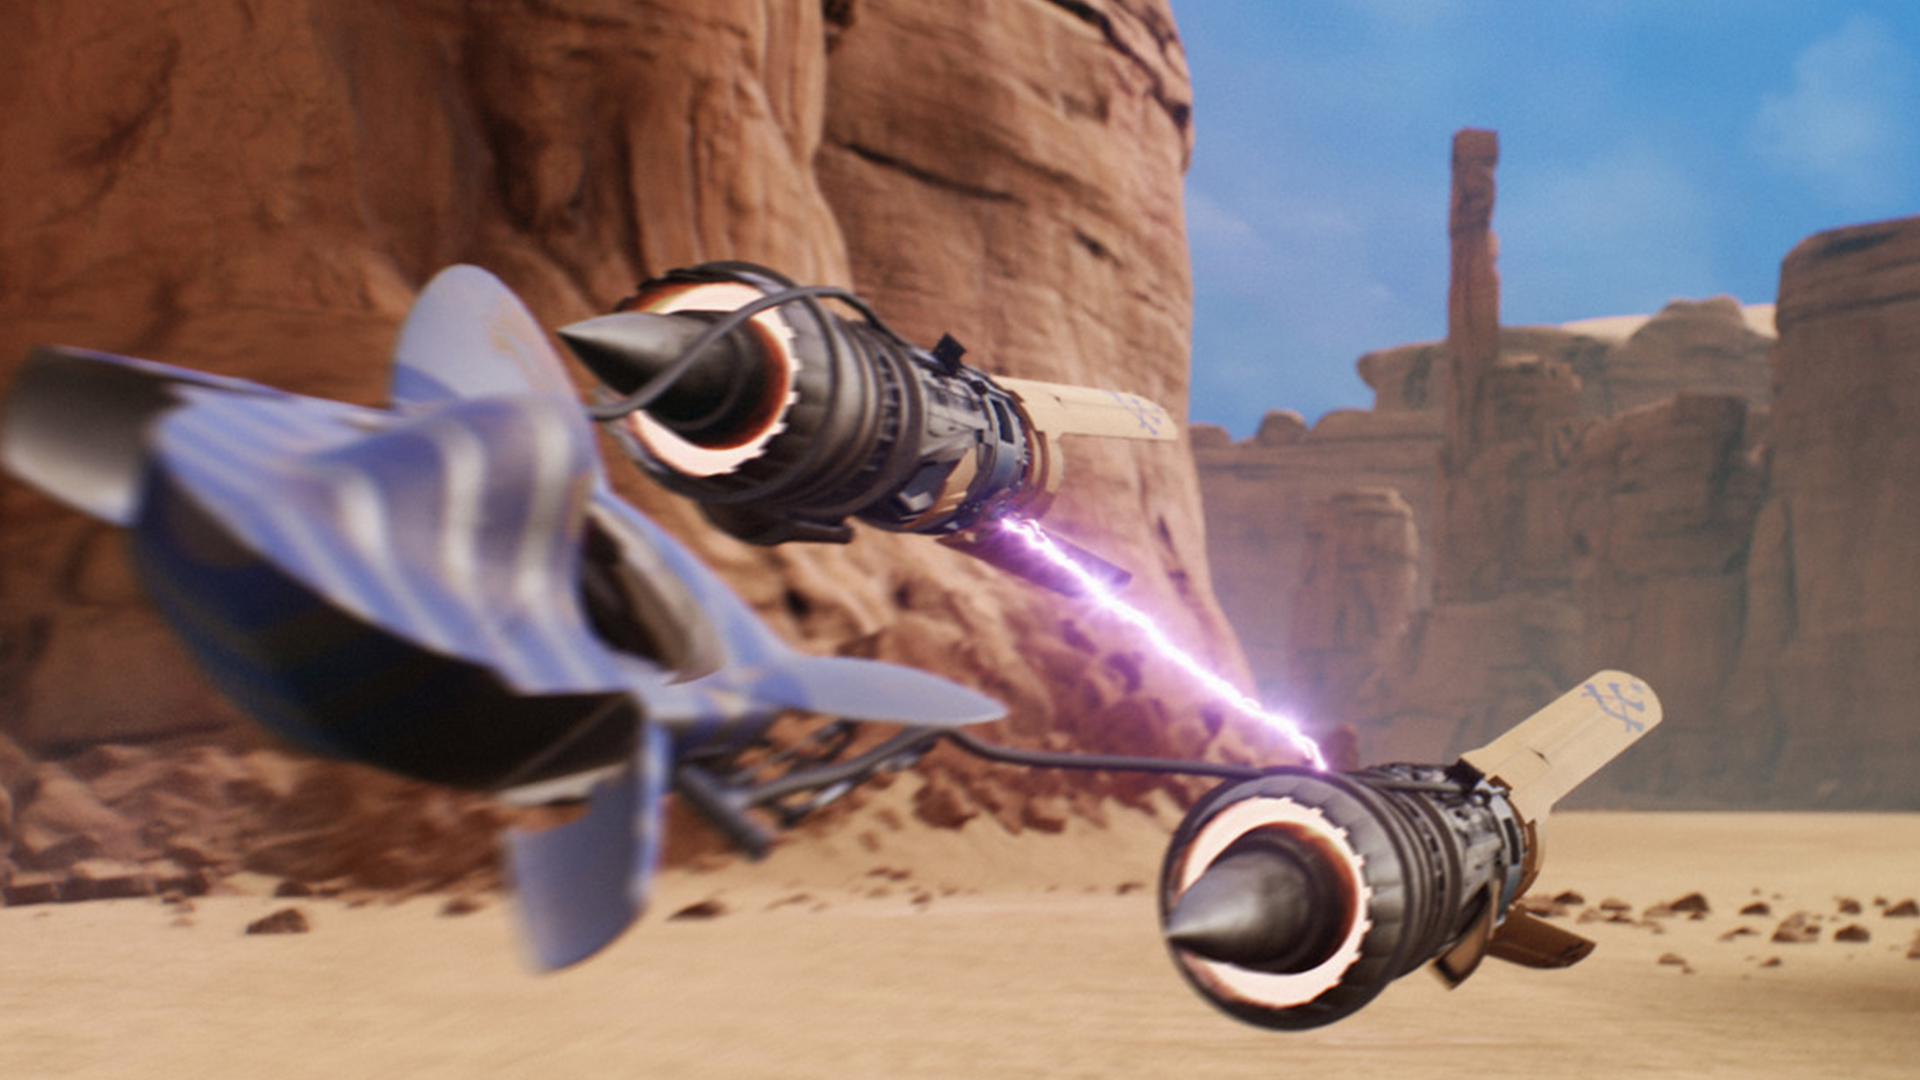 Star Wars Episode I: Racer lives again in Unreal Engine 4 – and you can play a demo